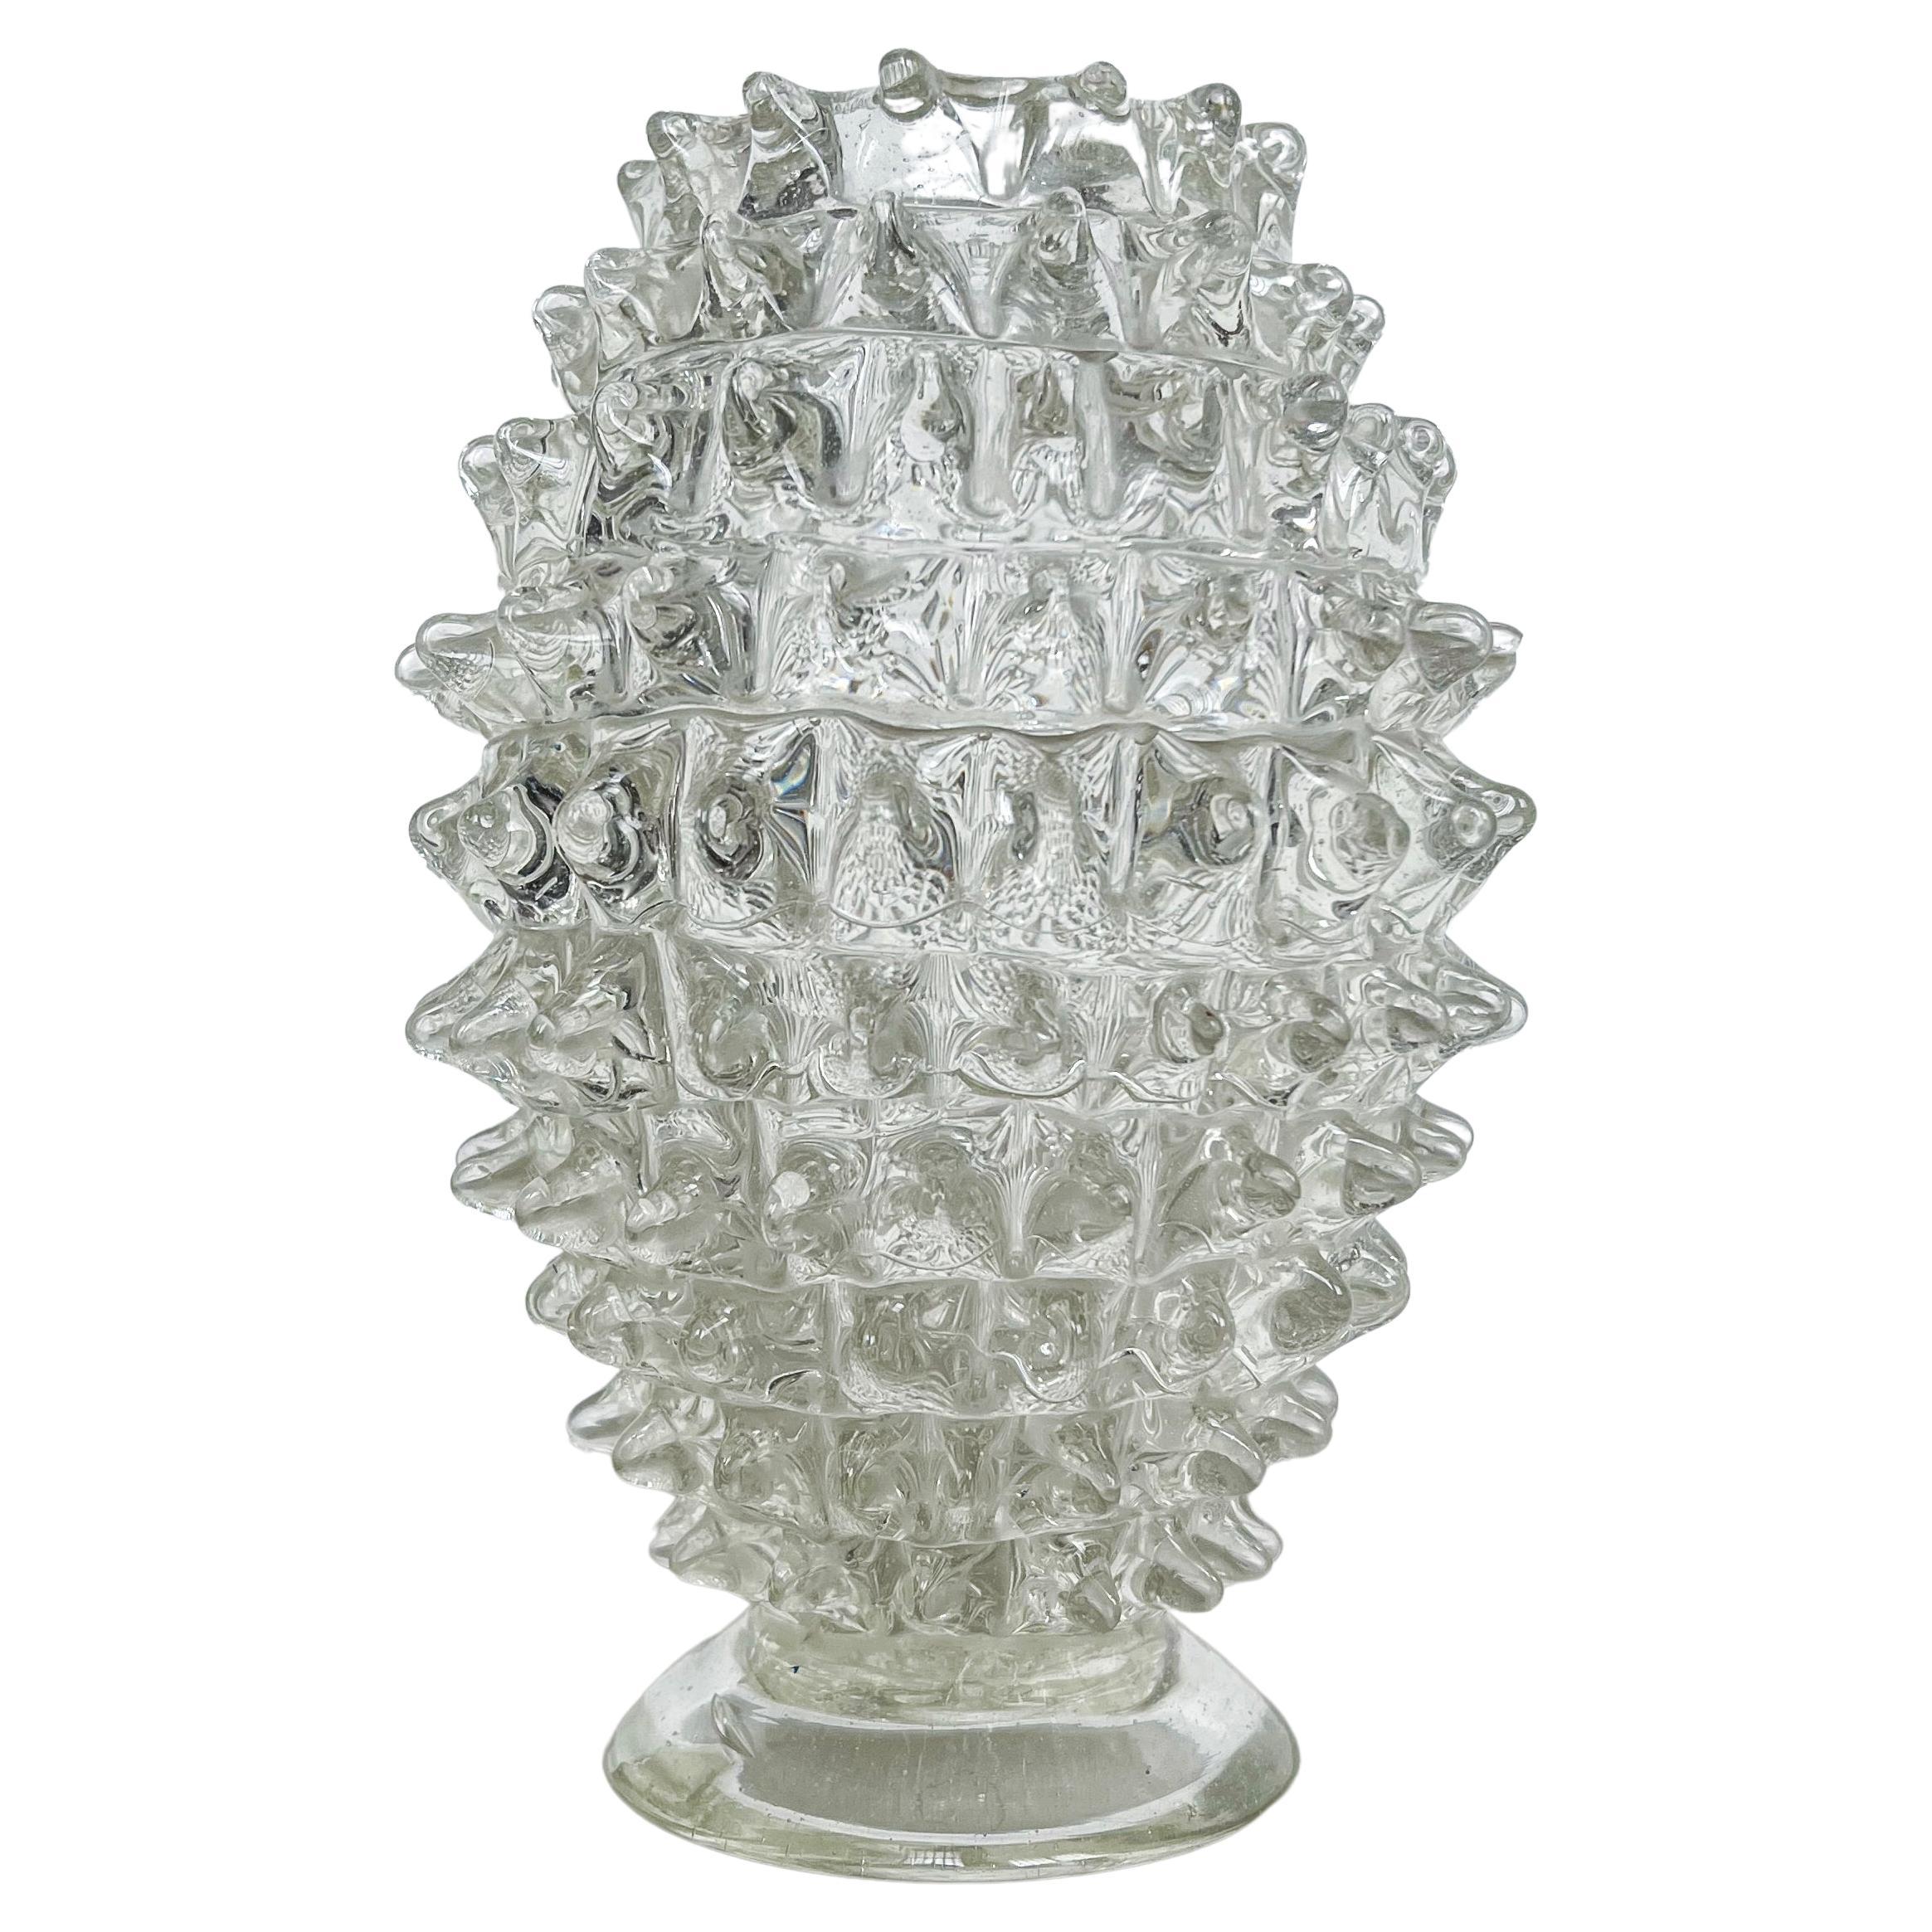 Vintage Rostrato vase in clear Murano glass by Barovier and Toso, Italian 1960s